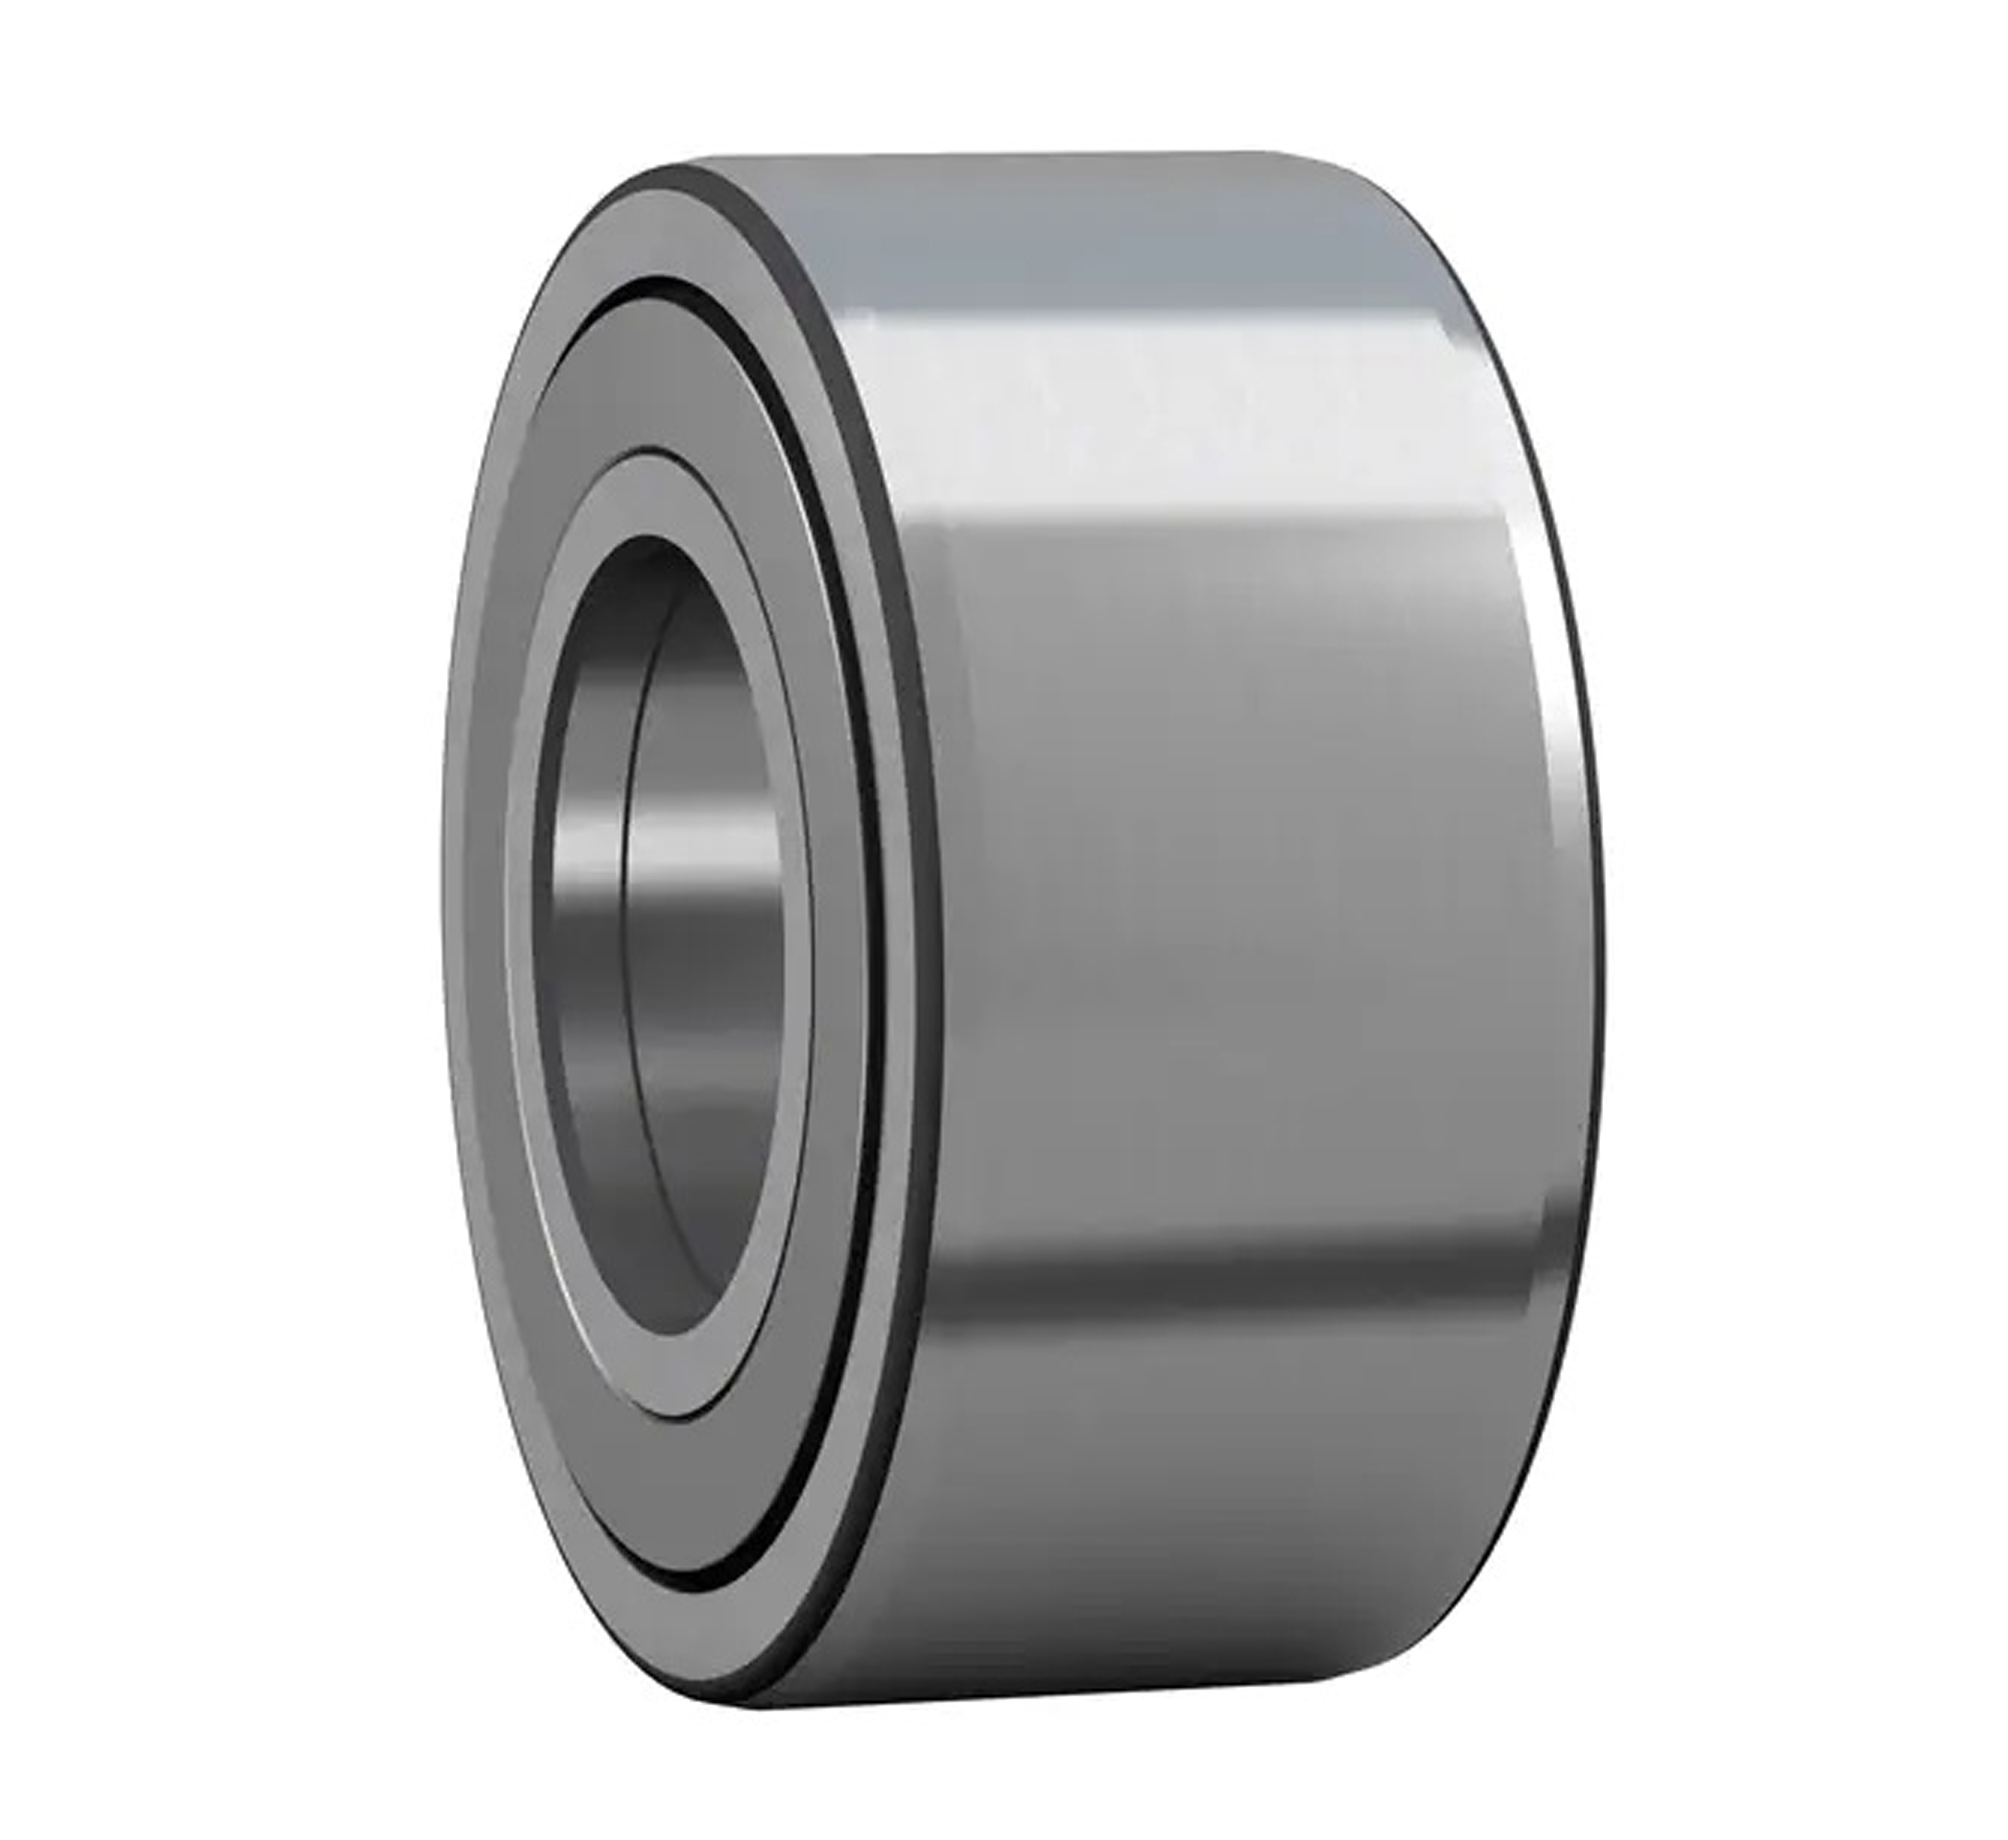 NATR10PP Support rollers yoke-type track rollers with flange rings